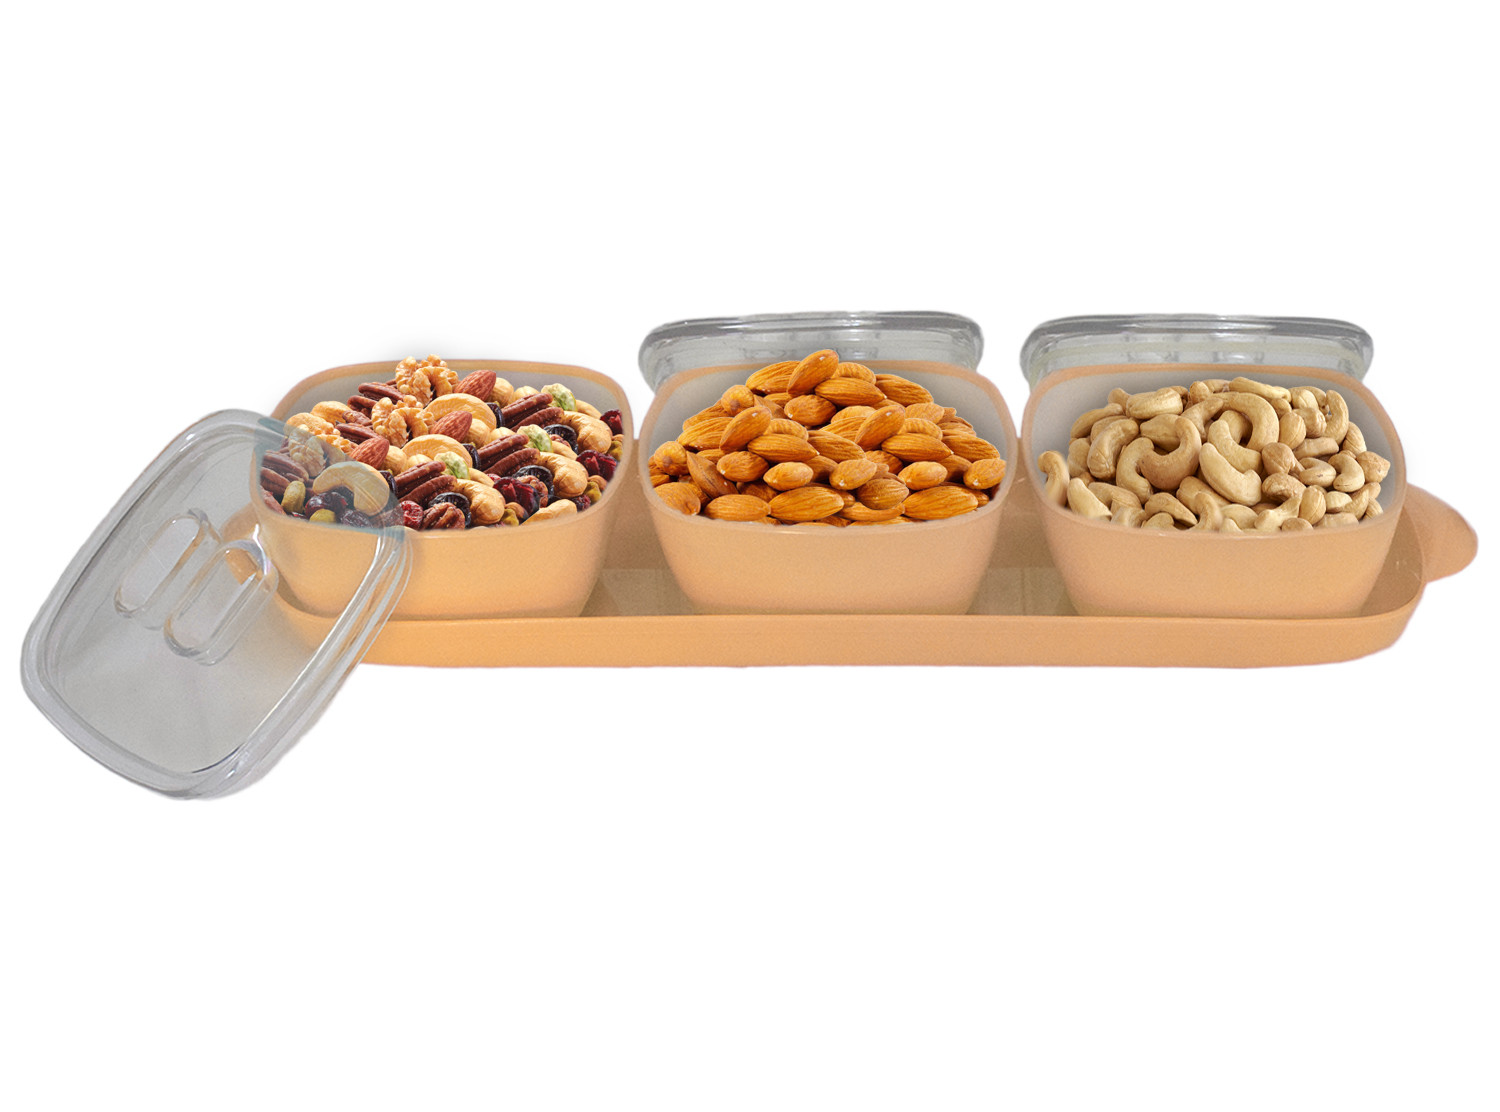 Kuber Industries Plastic 3 Bowls & 1 Tray Set For Serving & Store Dry Fruits, candies, Snacks With Silicon Rubberized Ring Lid (Autumn Orange)